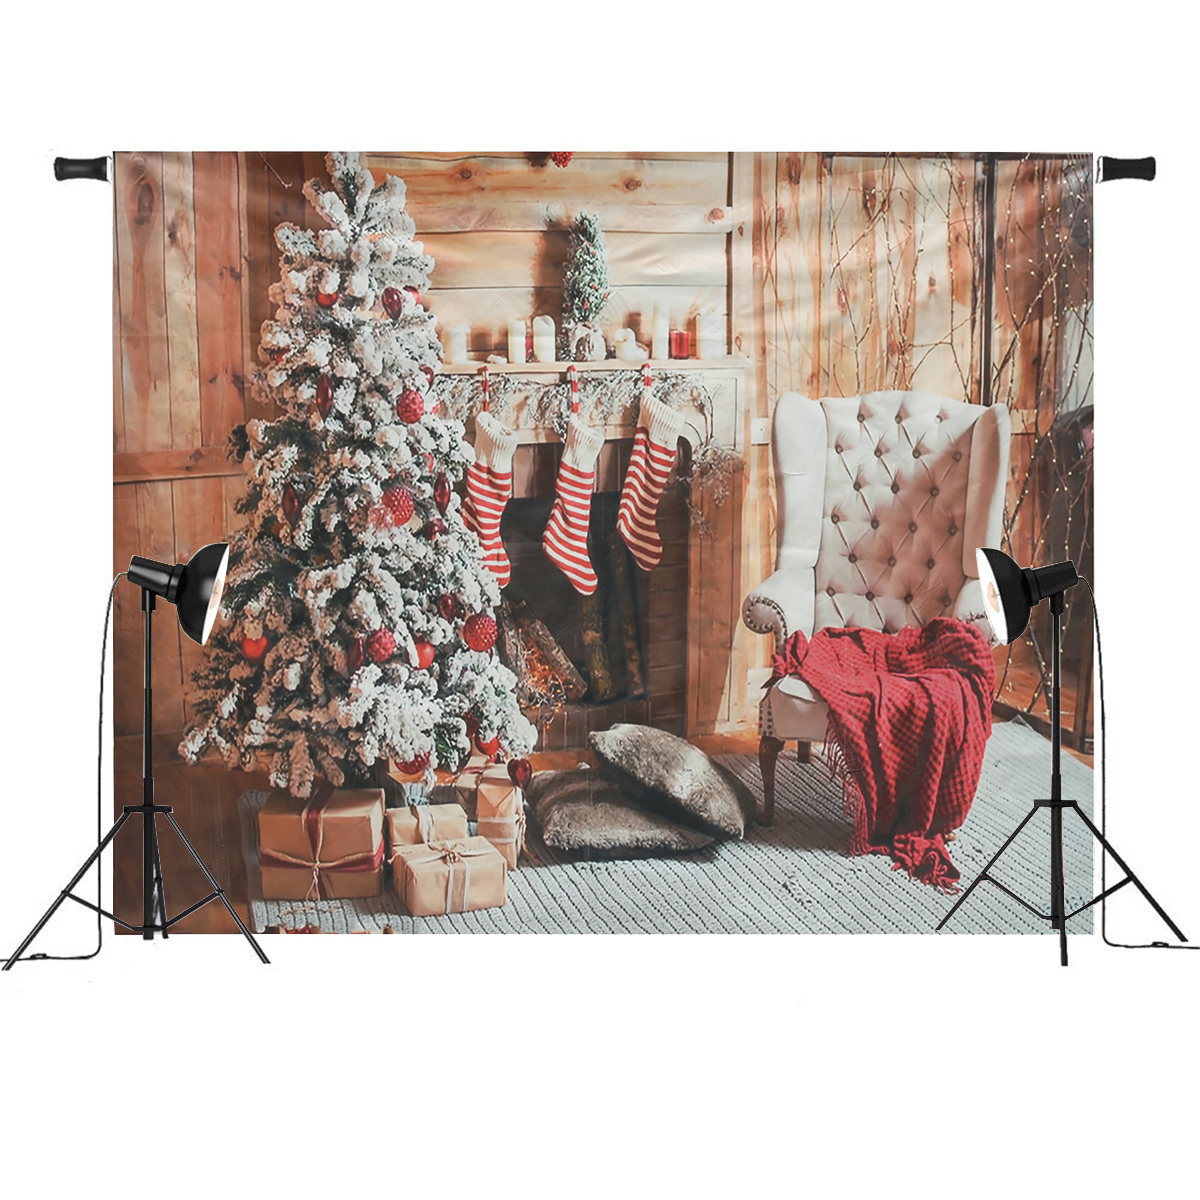 

7x5ft Christmas Fireplace Christmas Tree Chair Gift Stockings Photography Backdrop Studio Prop Background